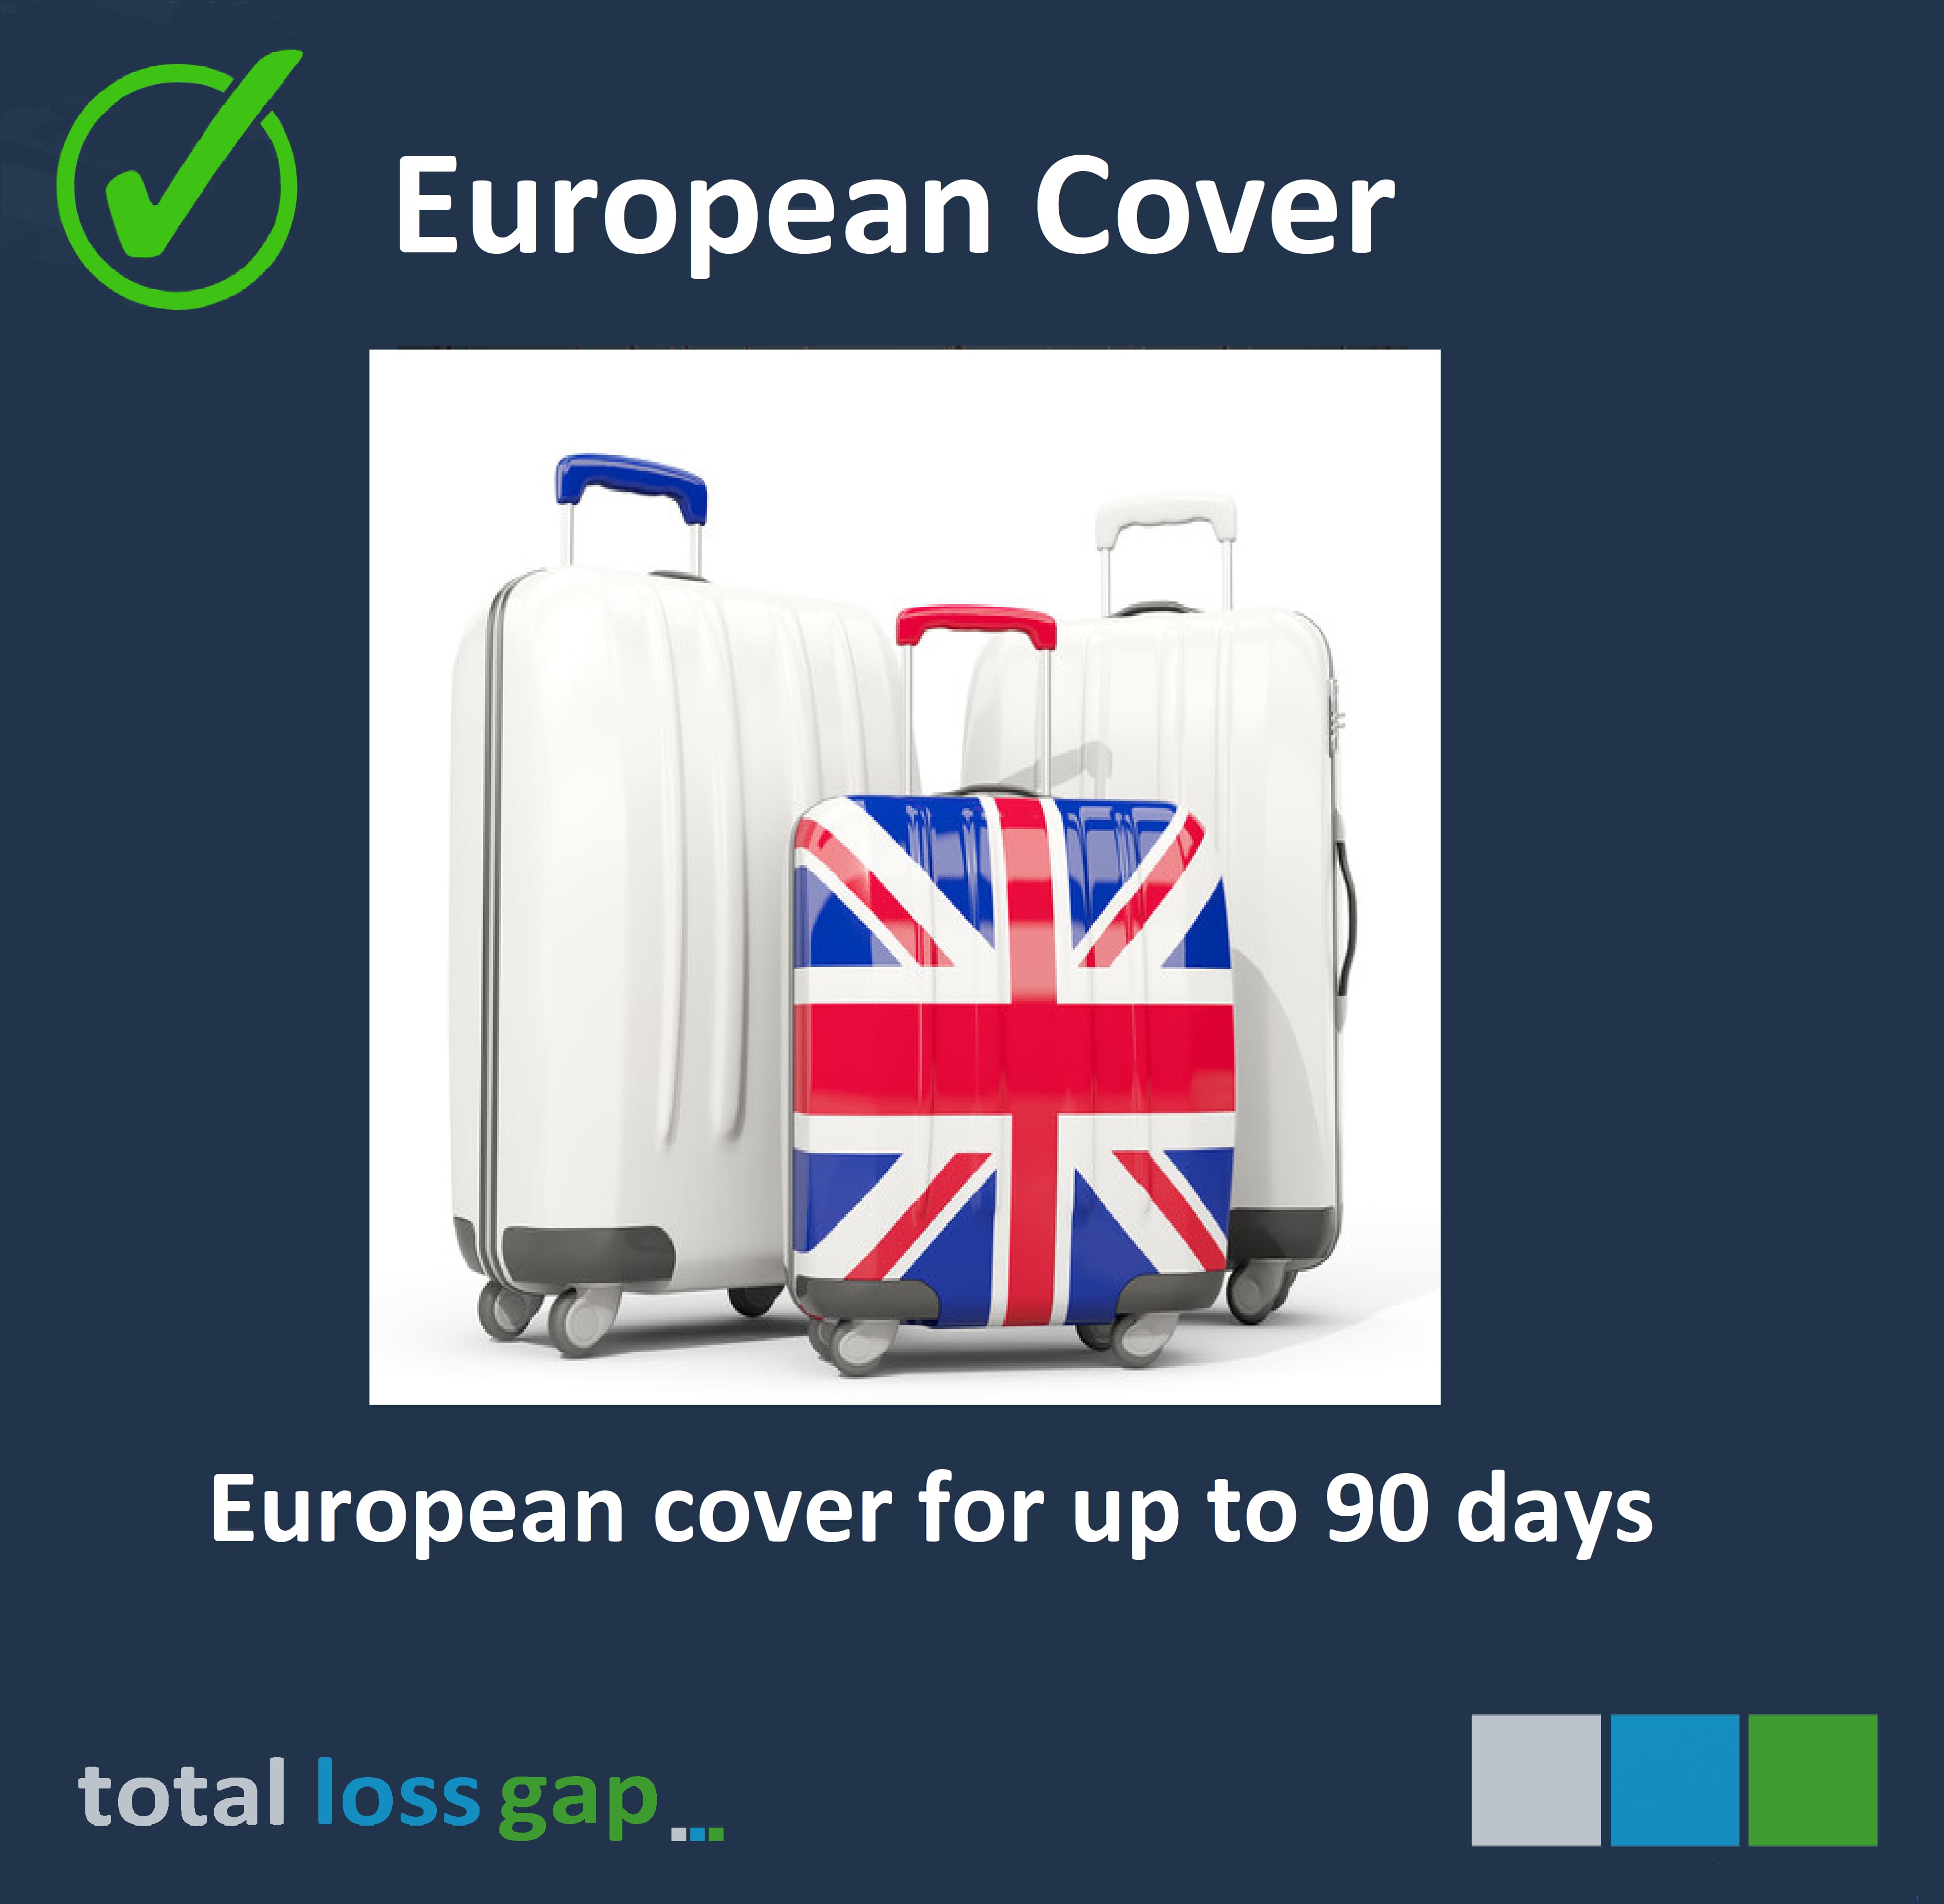 European cover for up to 90 days in a calendar year 